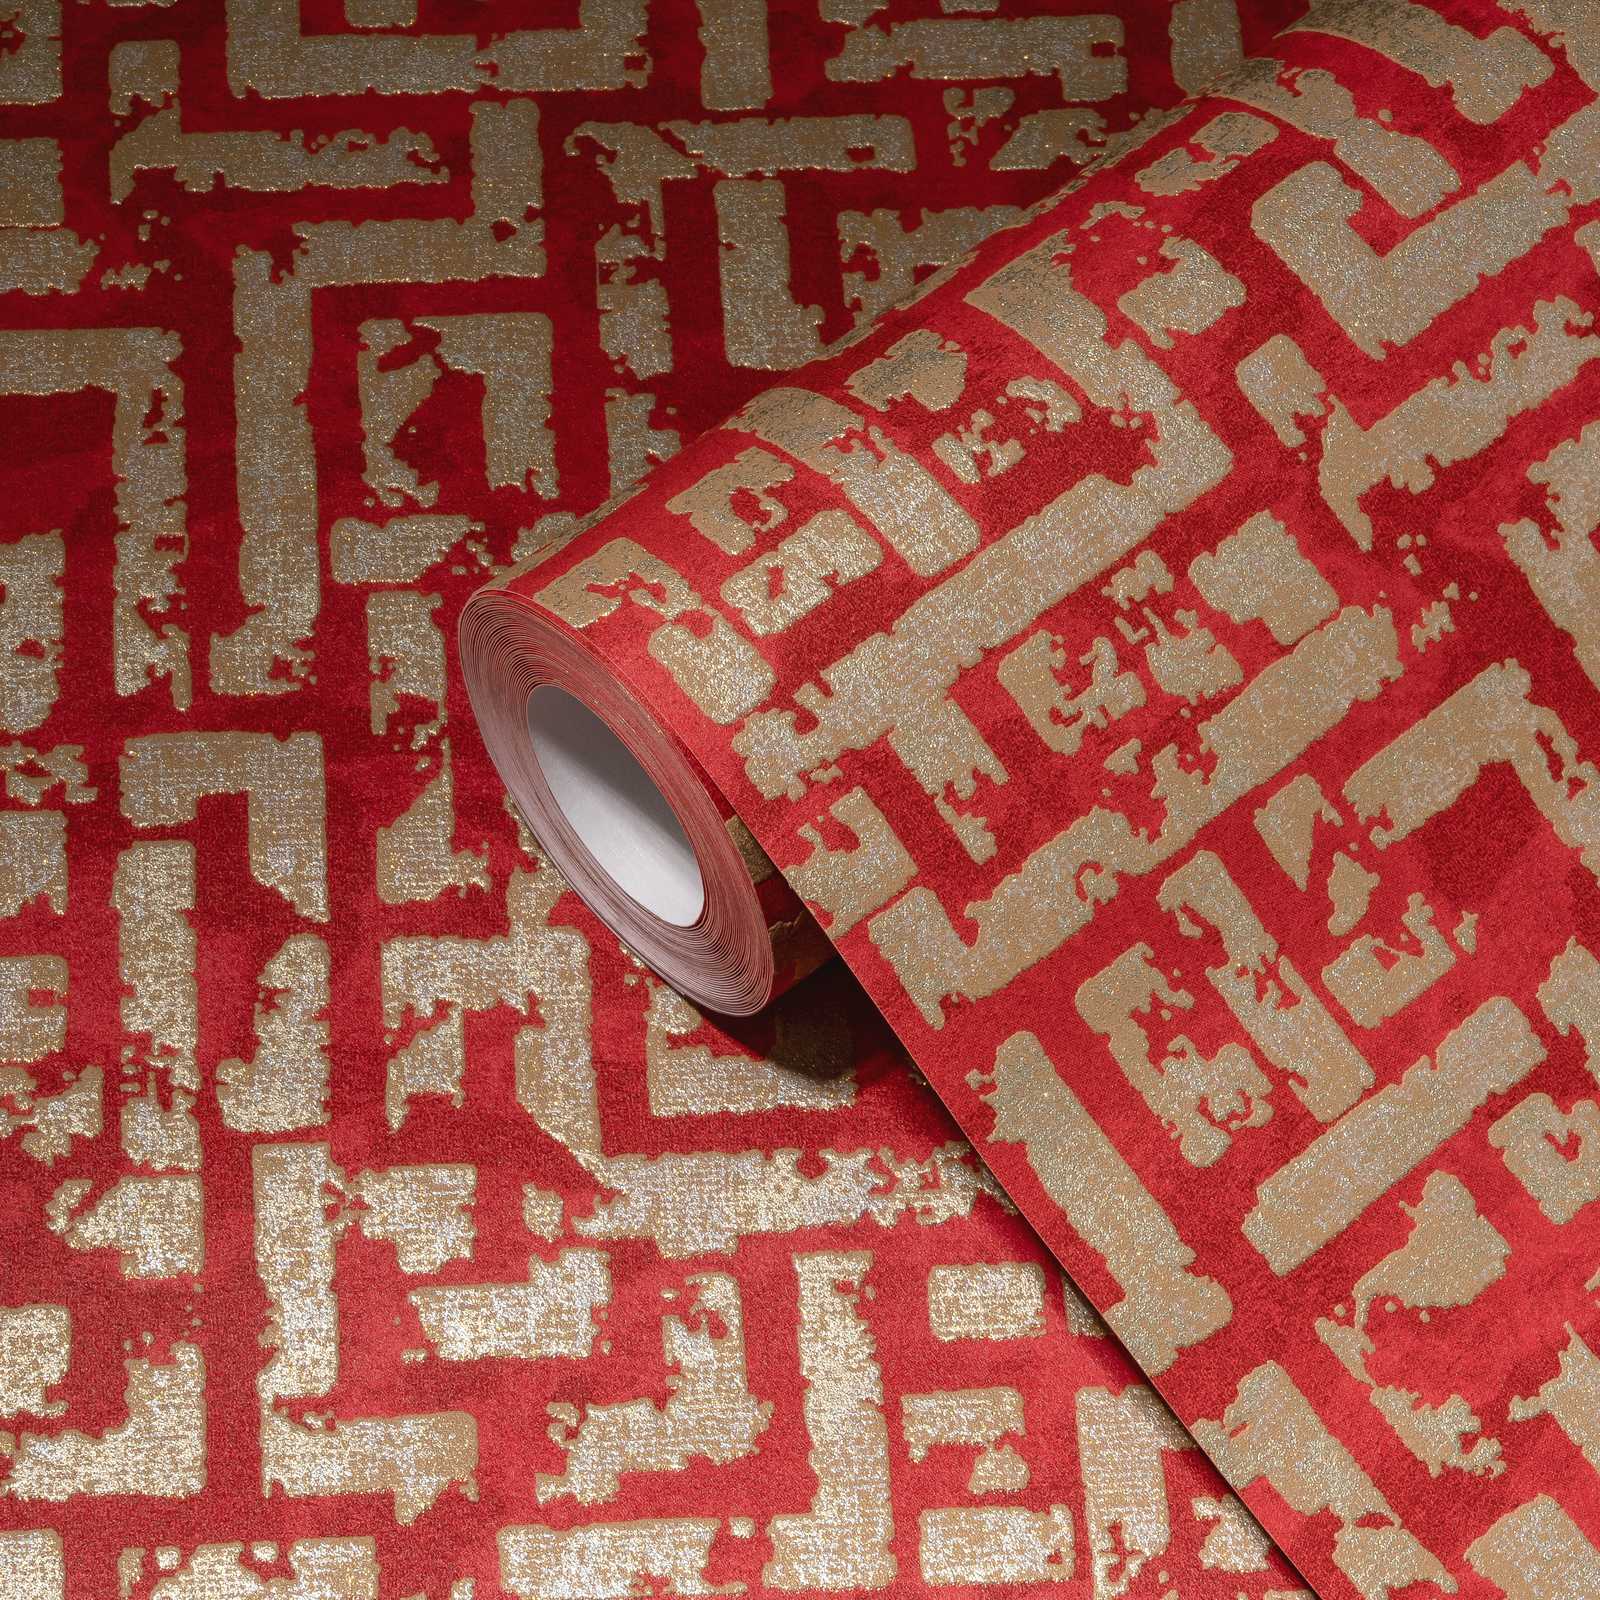             Wallpaper red-gold with graphic pattern & used look - red, metallic
        